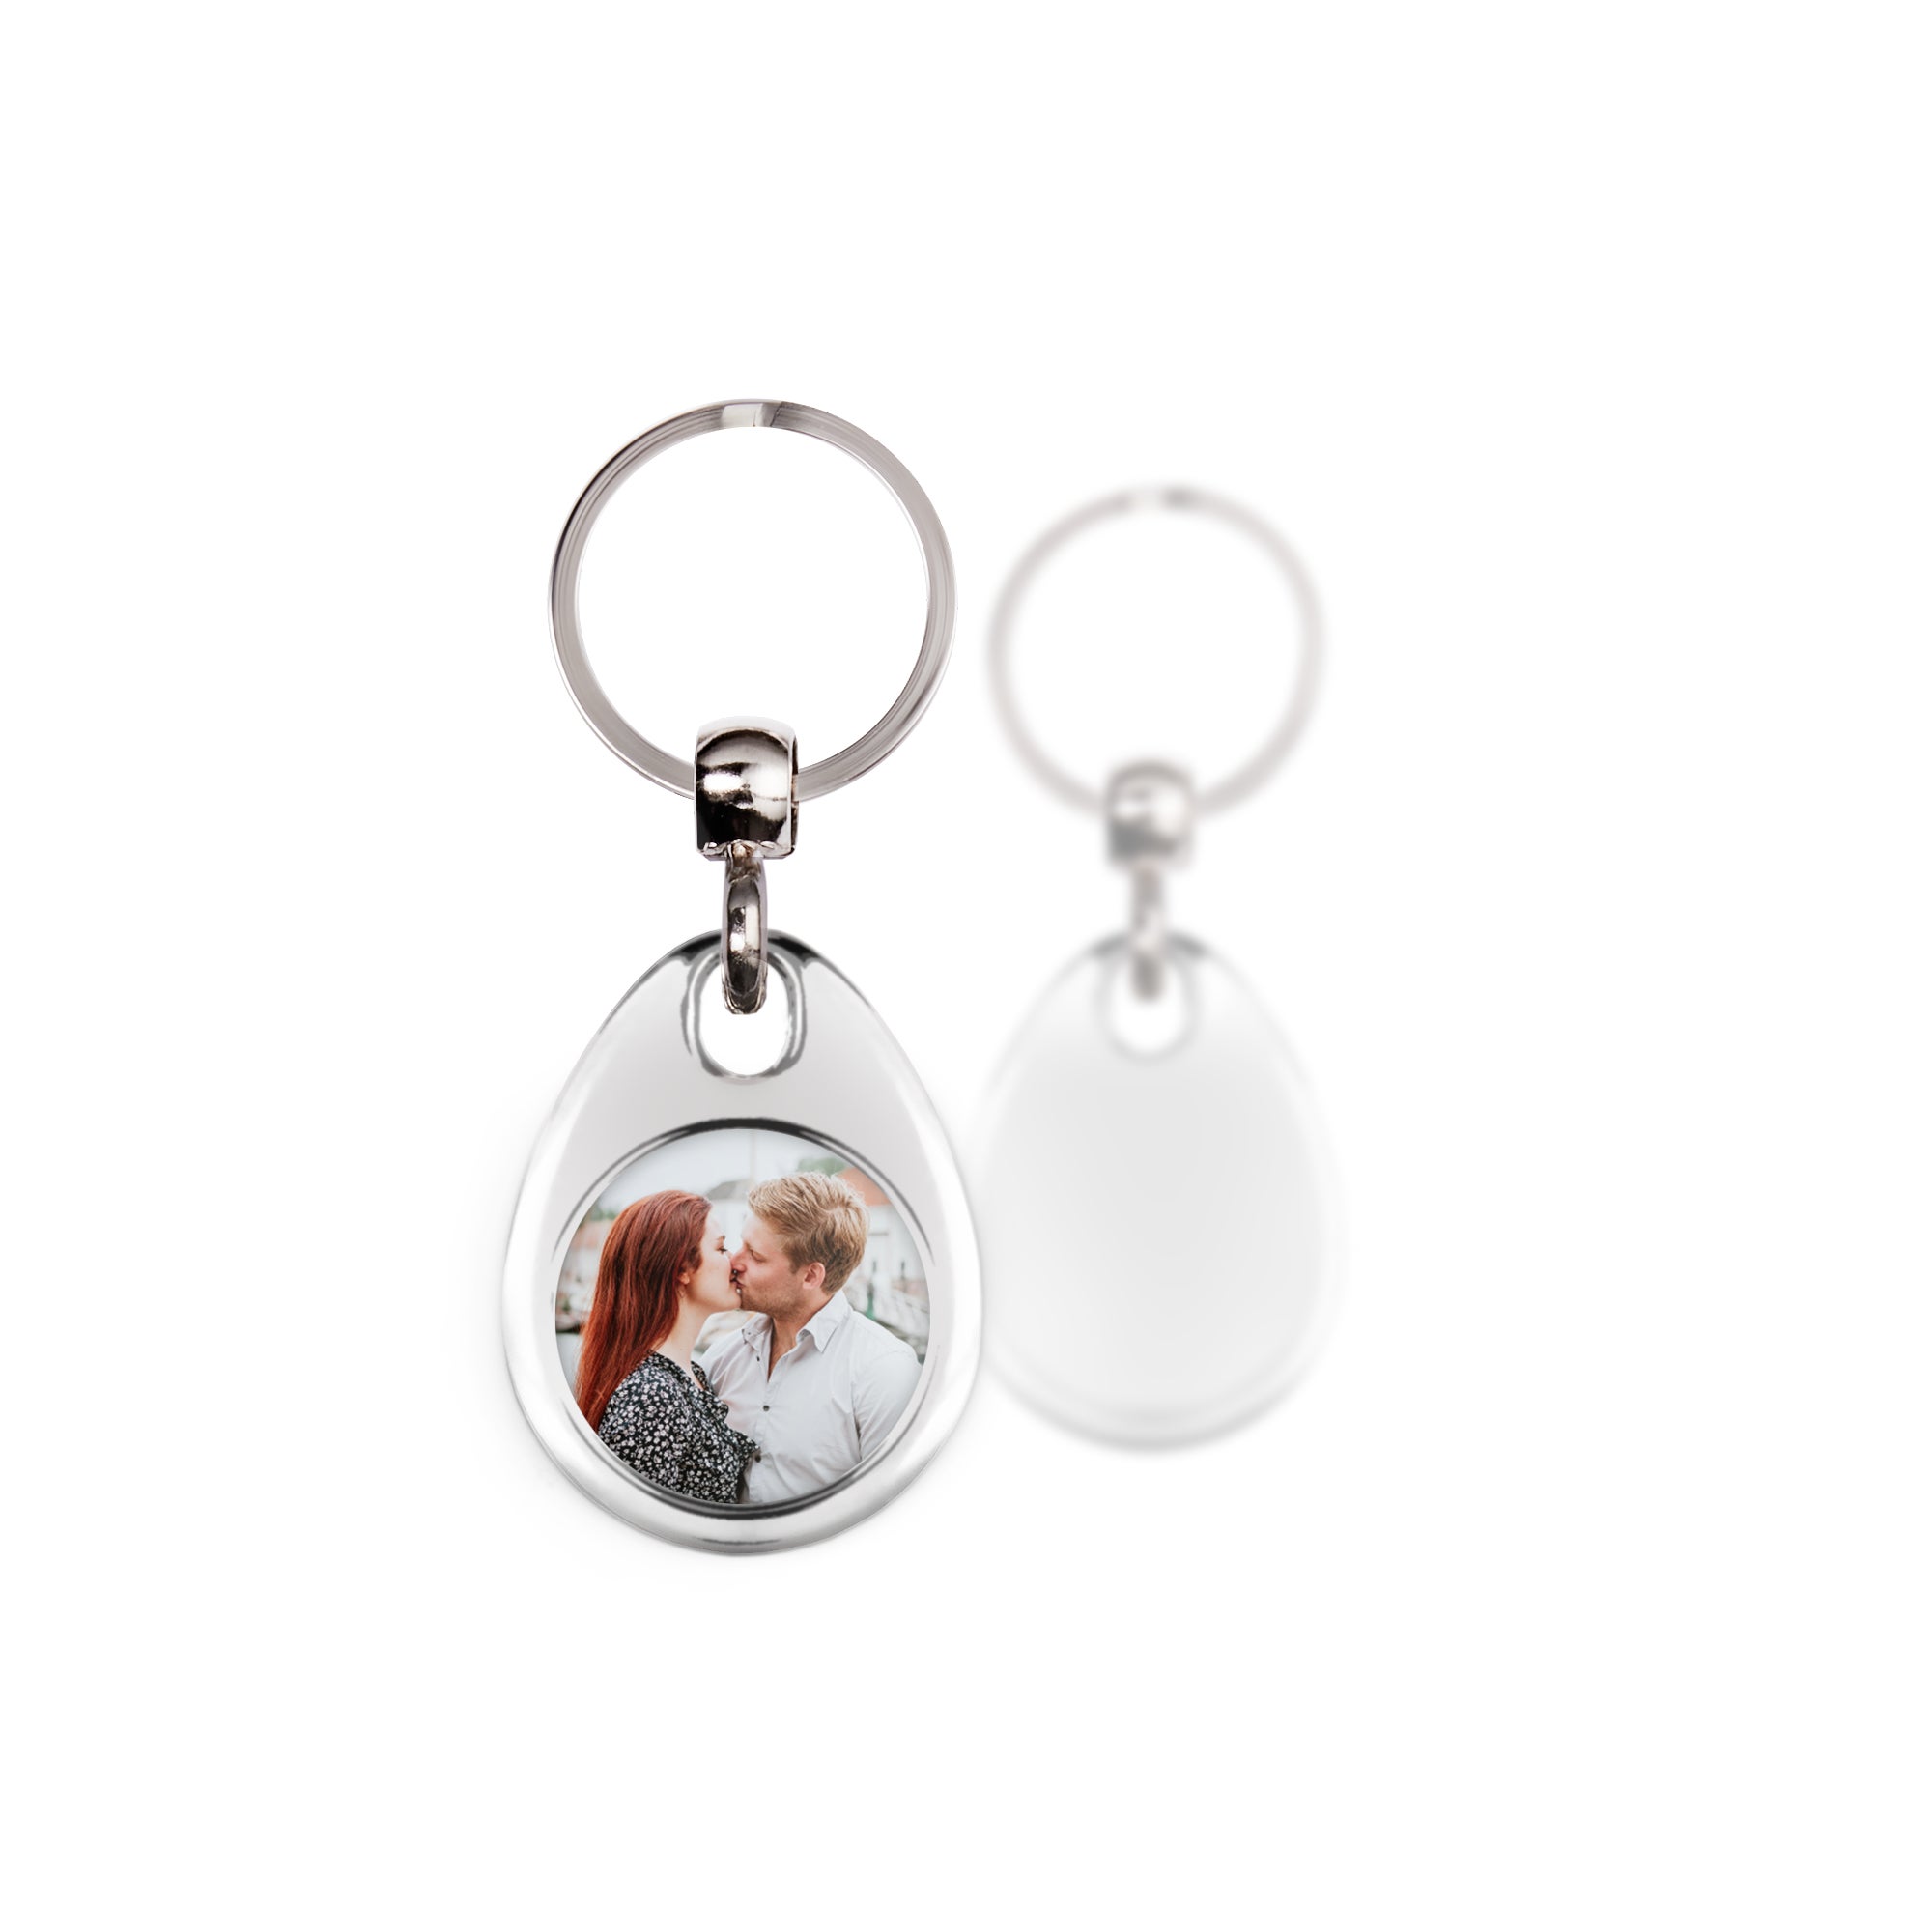 Personalised key ring - Round - Stainless steel